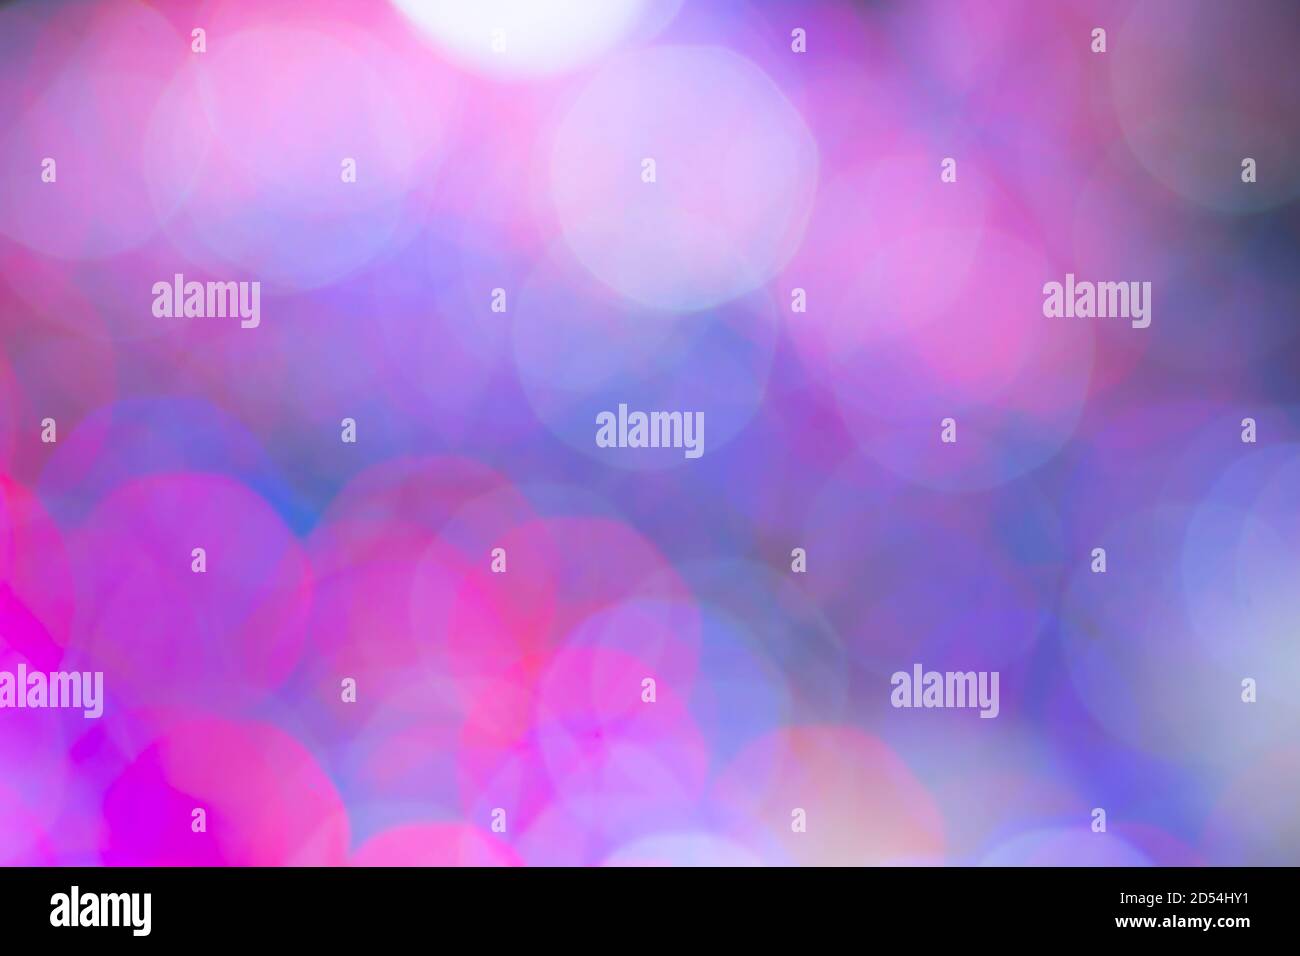 colored blurry round spots of cool shades for pale mauve background Stock Photo